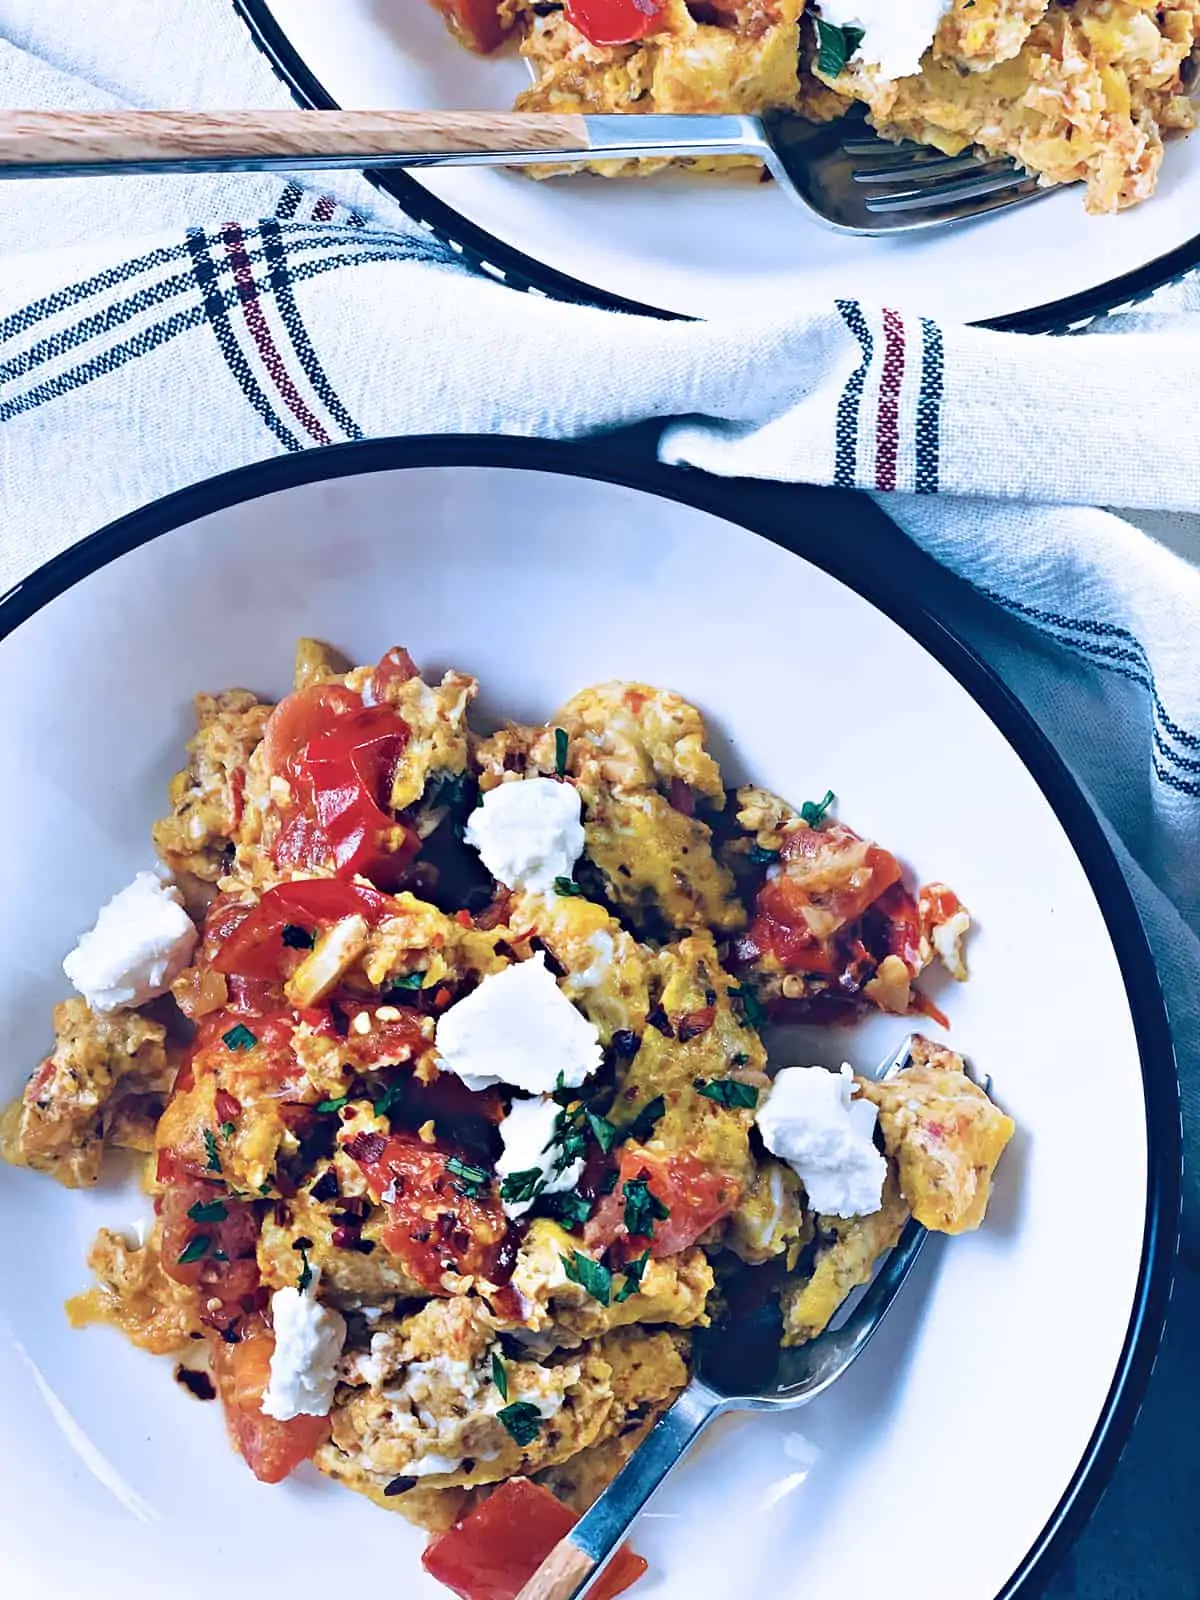 https://www.easyanddelish.com/wp-content/uploads/2022/07/High-protein-lunches-Greek-eggs-kayana-by-the-greek-foodie.webp